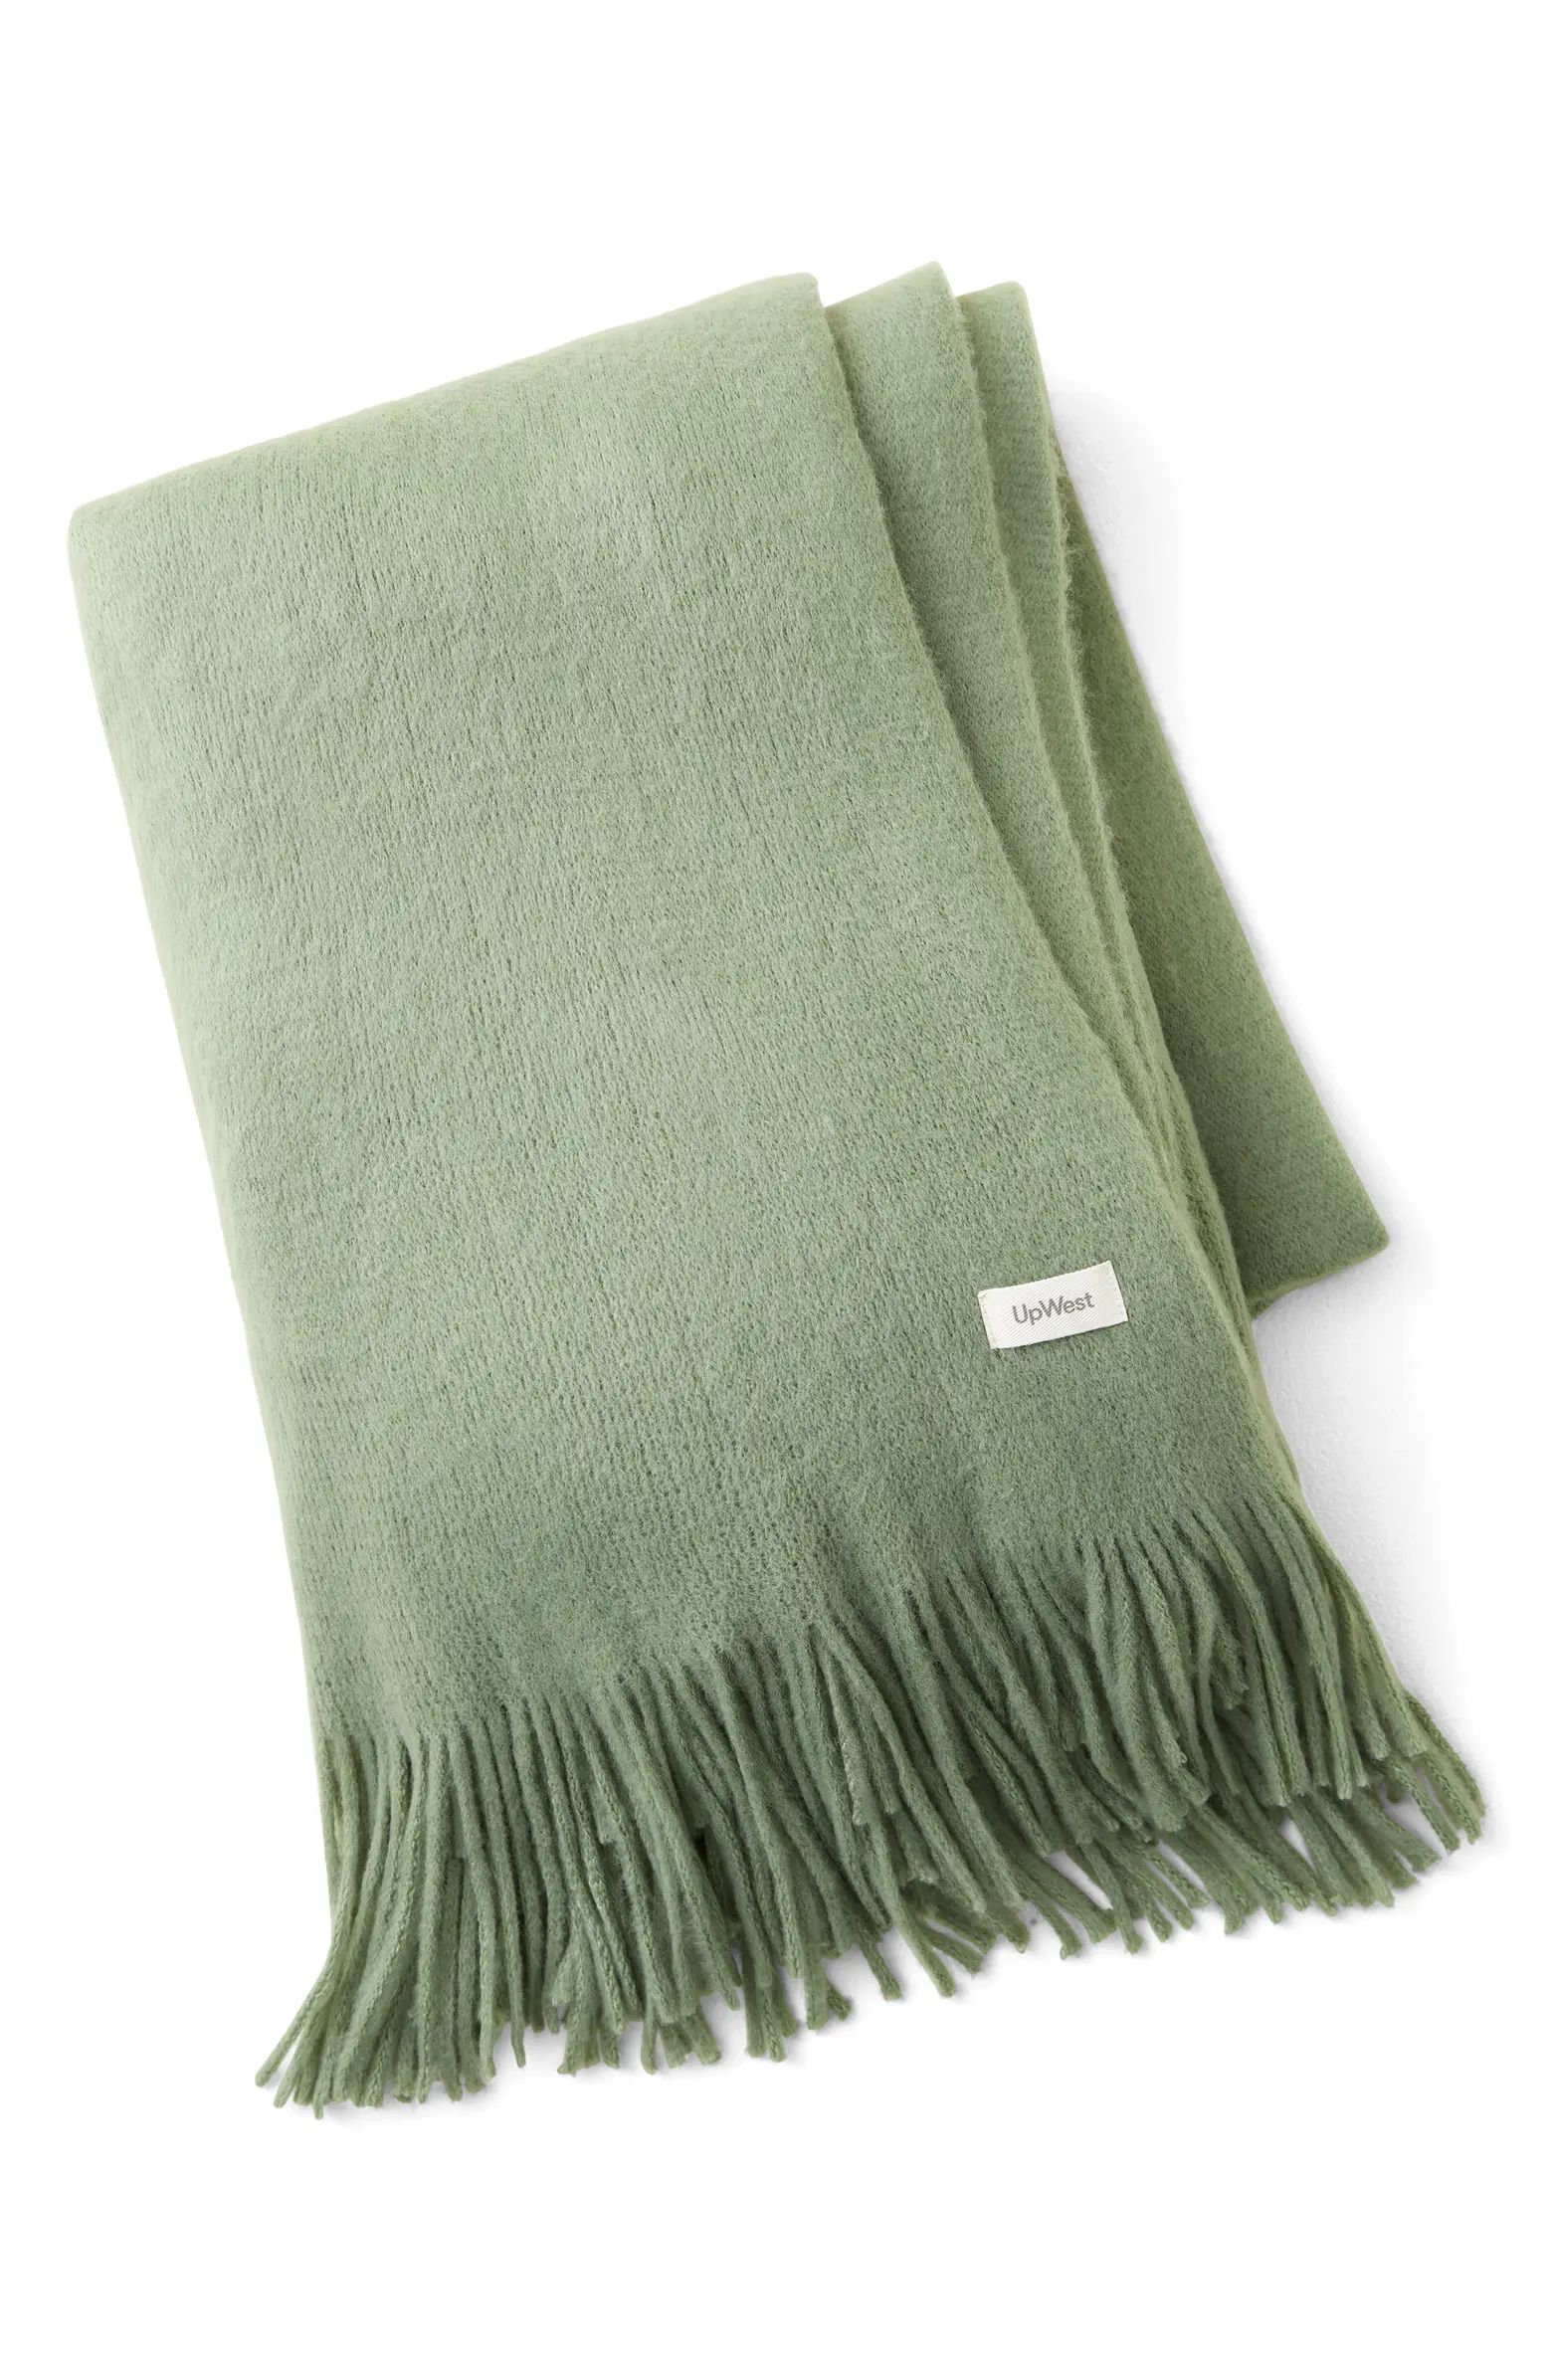 The Softest Throw Blanket | Nordstrom